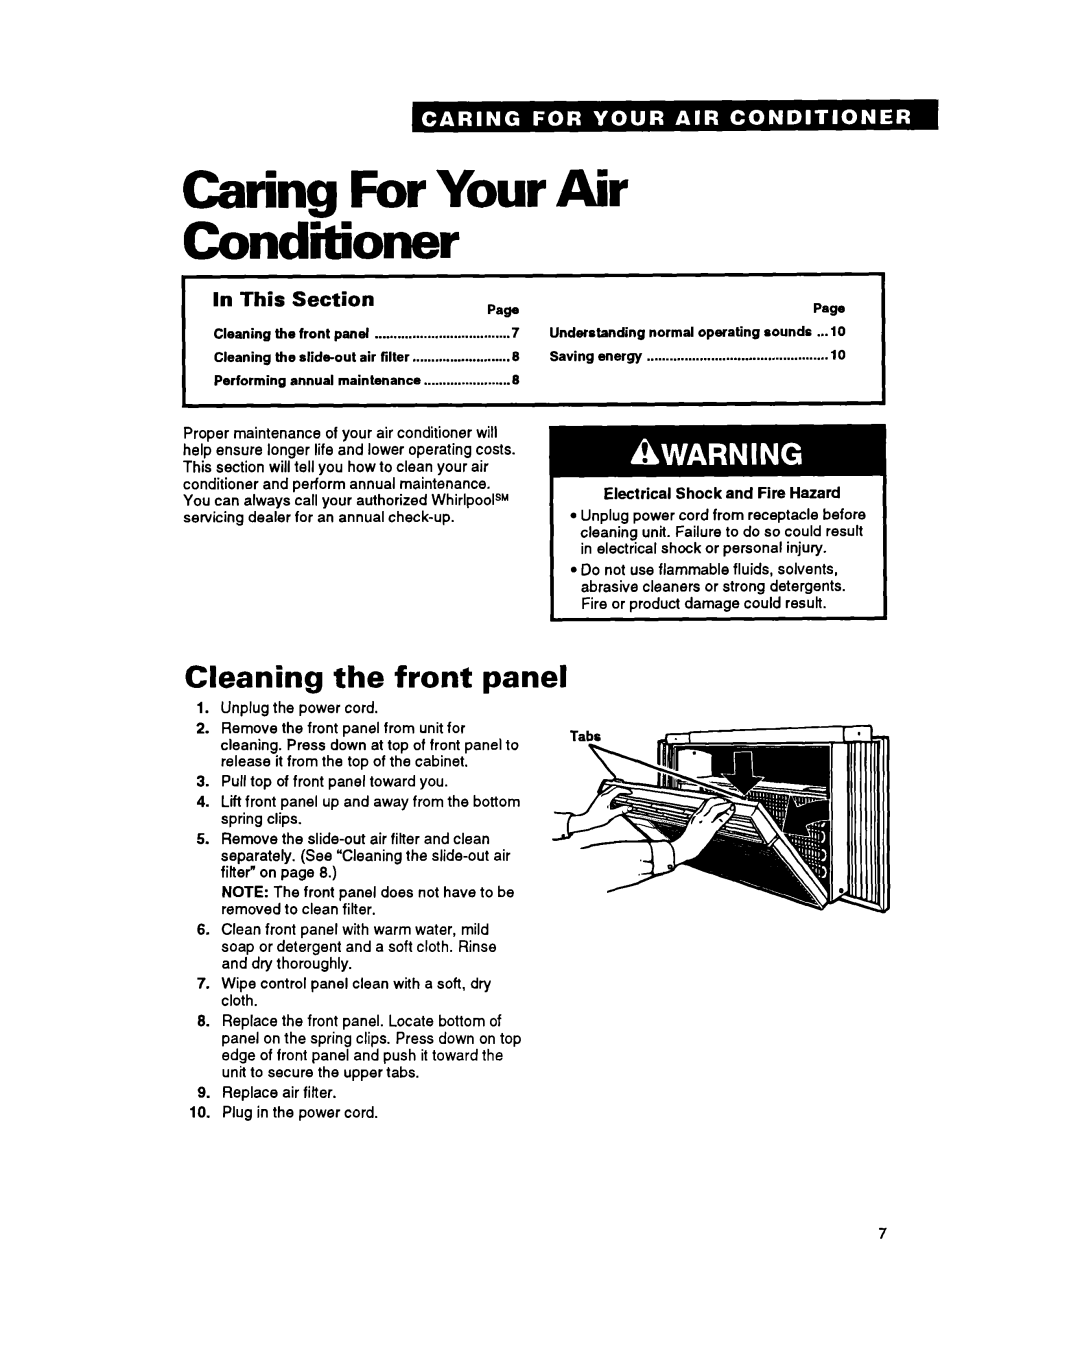 Whirlpool AC0052, ACQ062 warranty Caring For Your Air Conditioner, Cleaning the front panel, I In This Section 